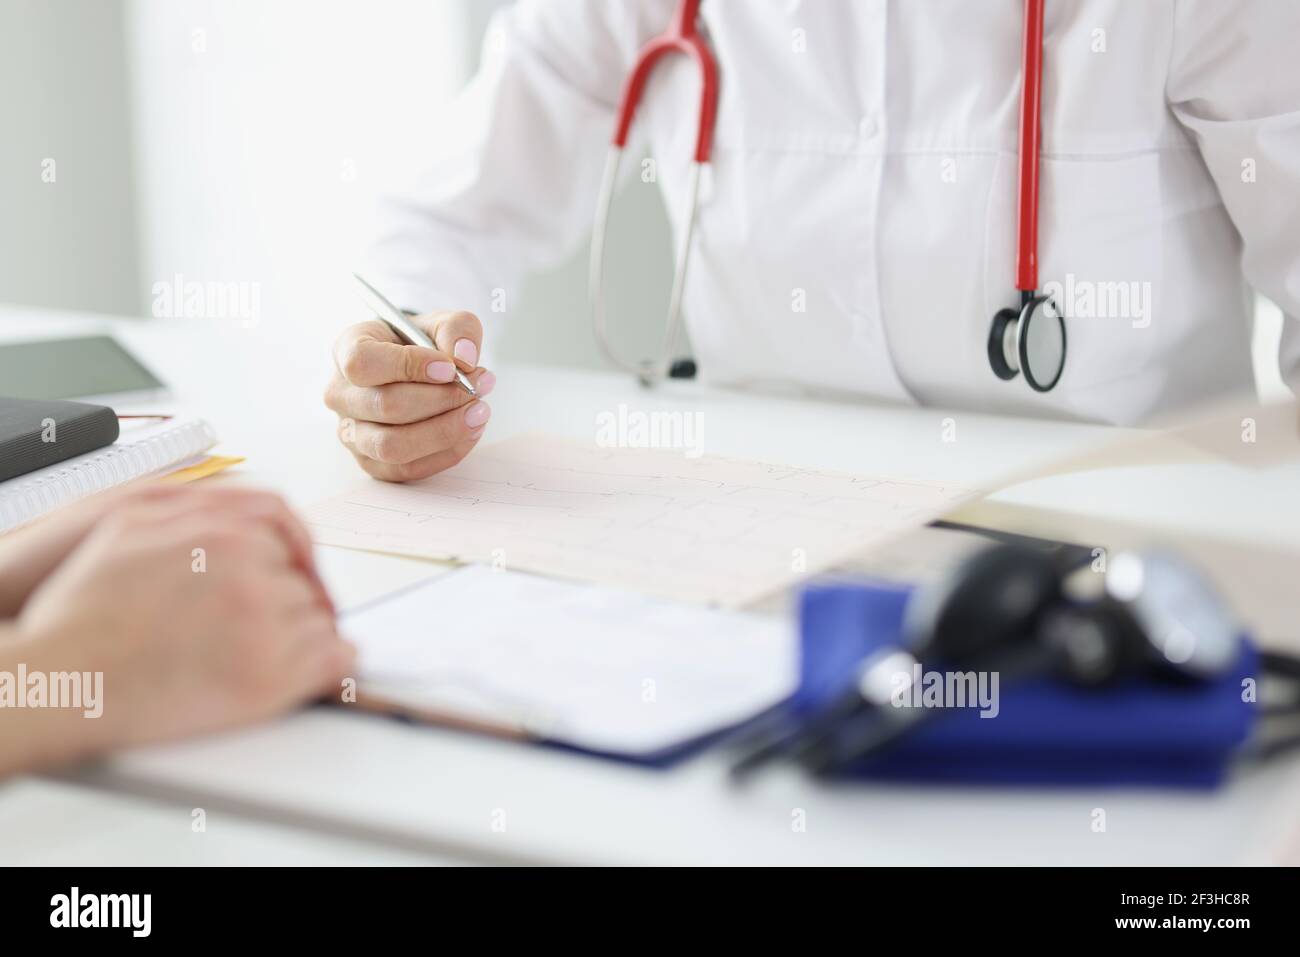 Doctor takes care of patient and makes entries in medical record Stock Photo